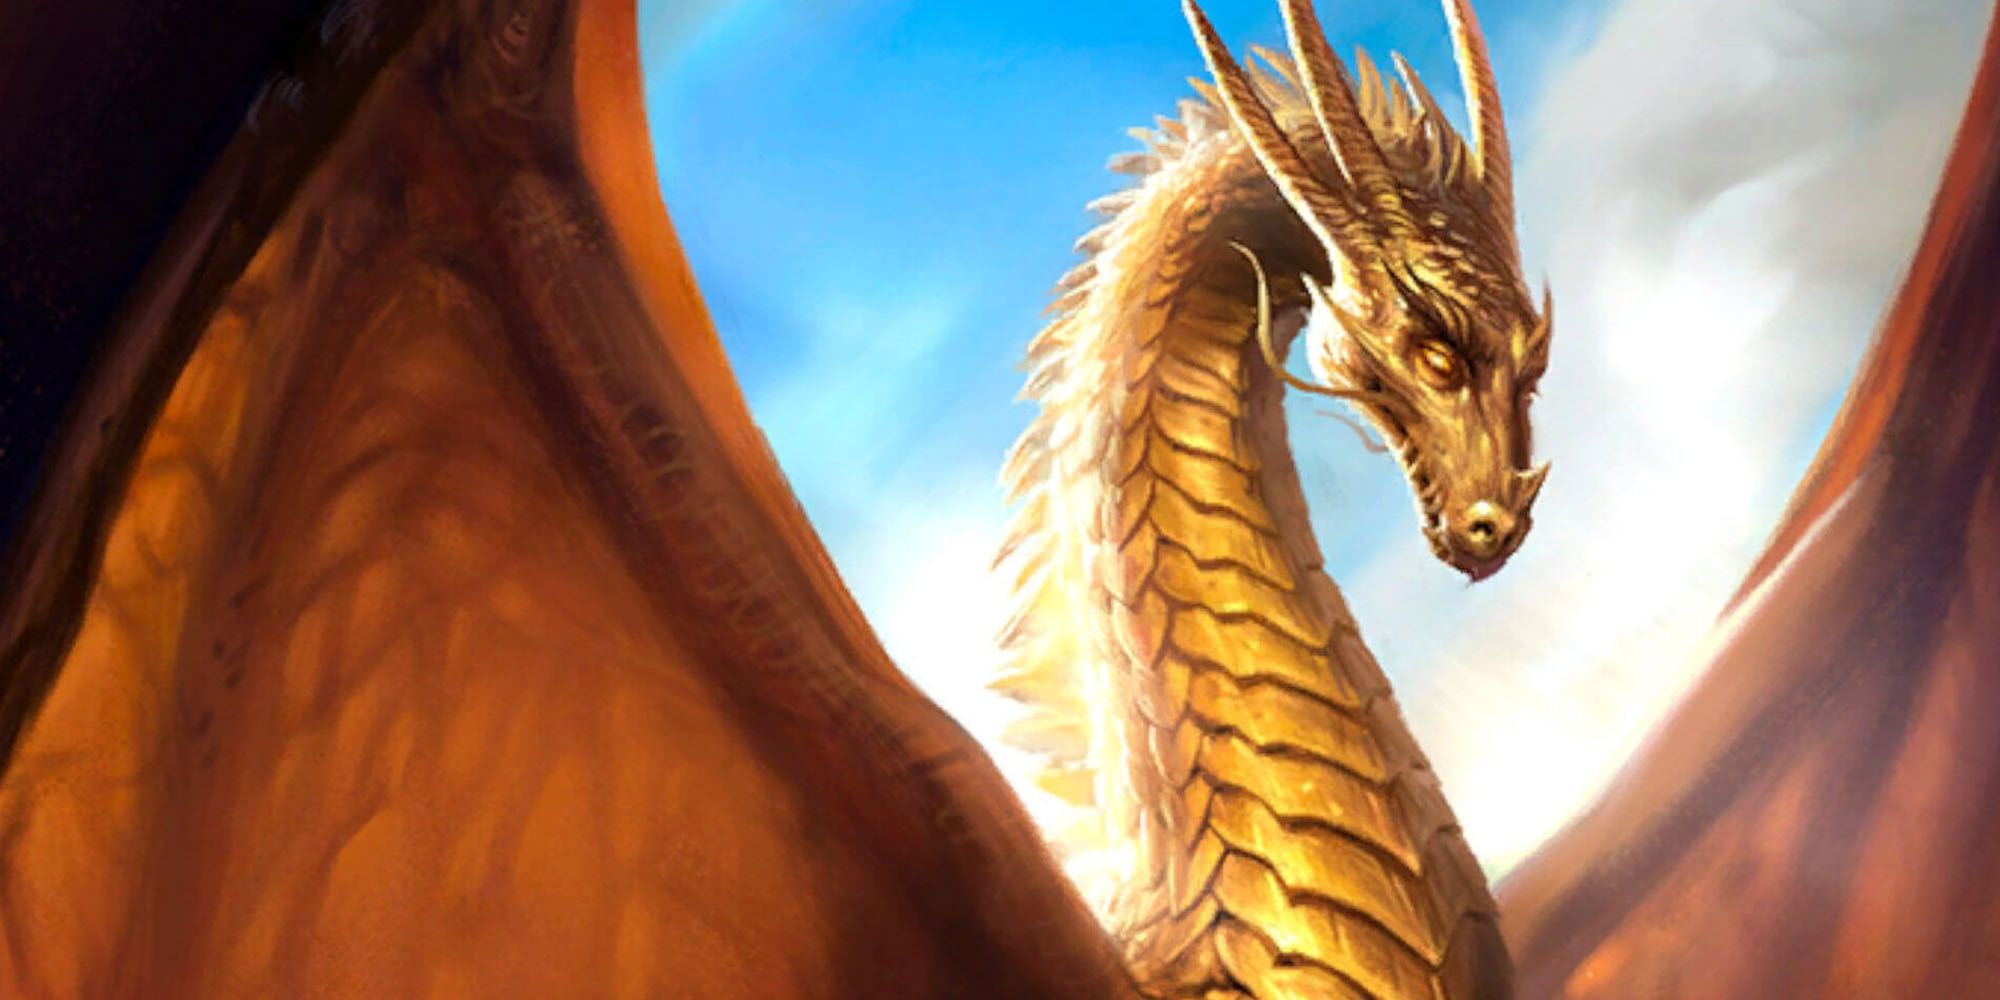 A gold dragon that resembles Sunfyre, Aegon II's dragon in House of the Dragon